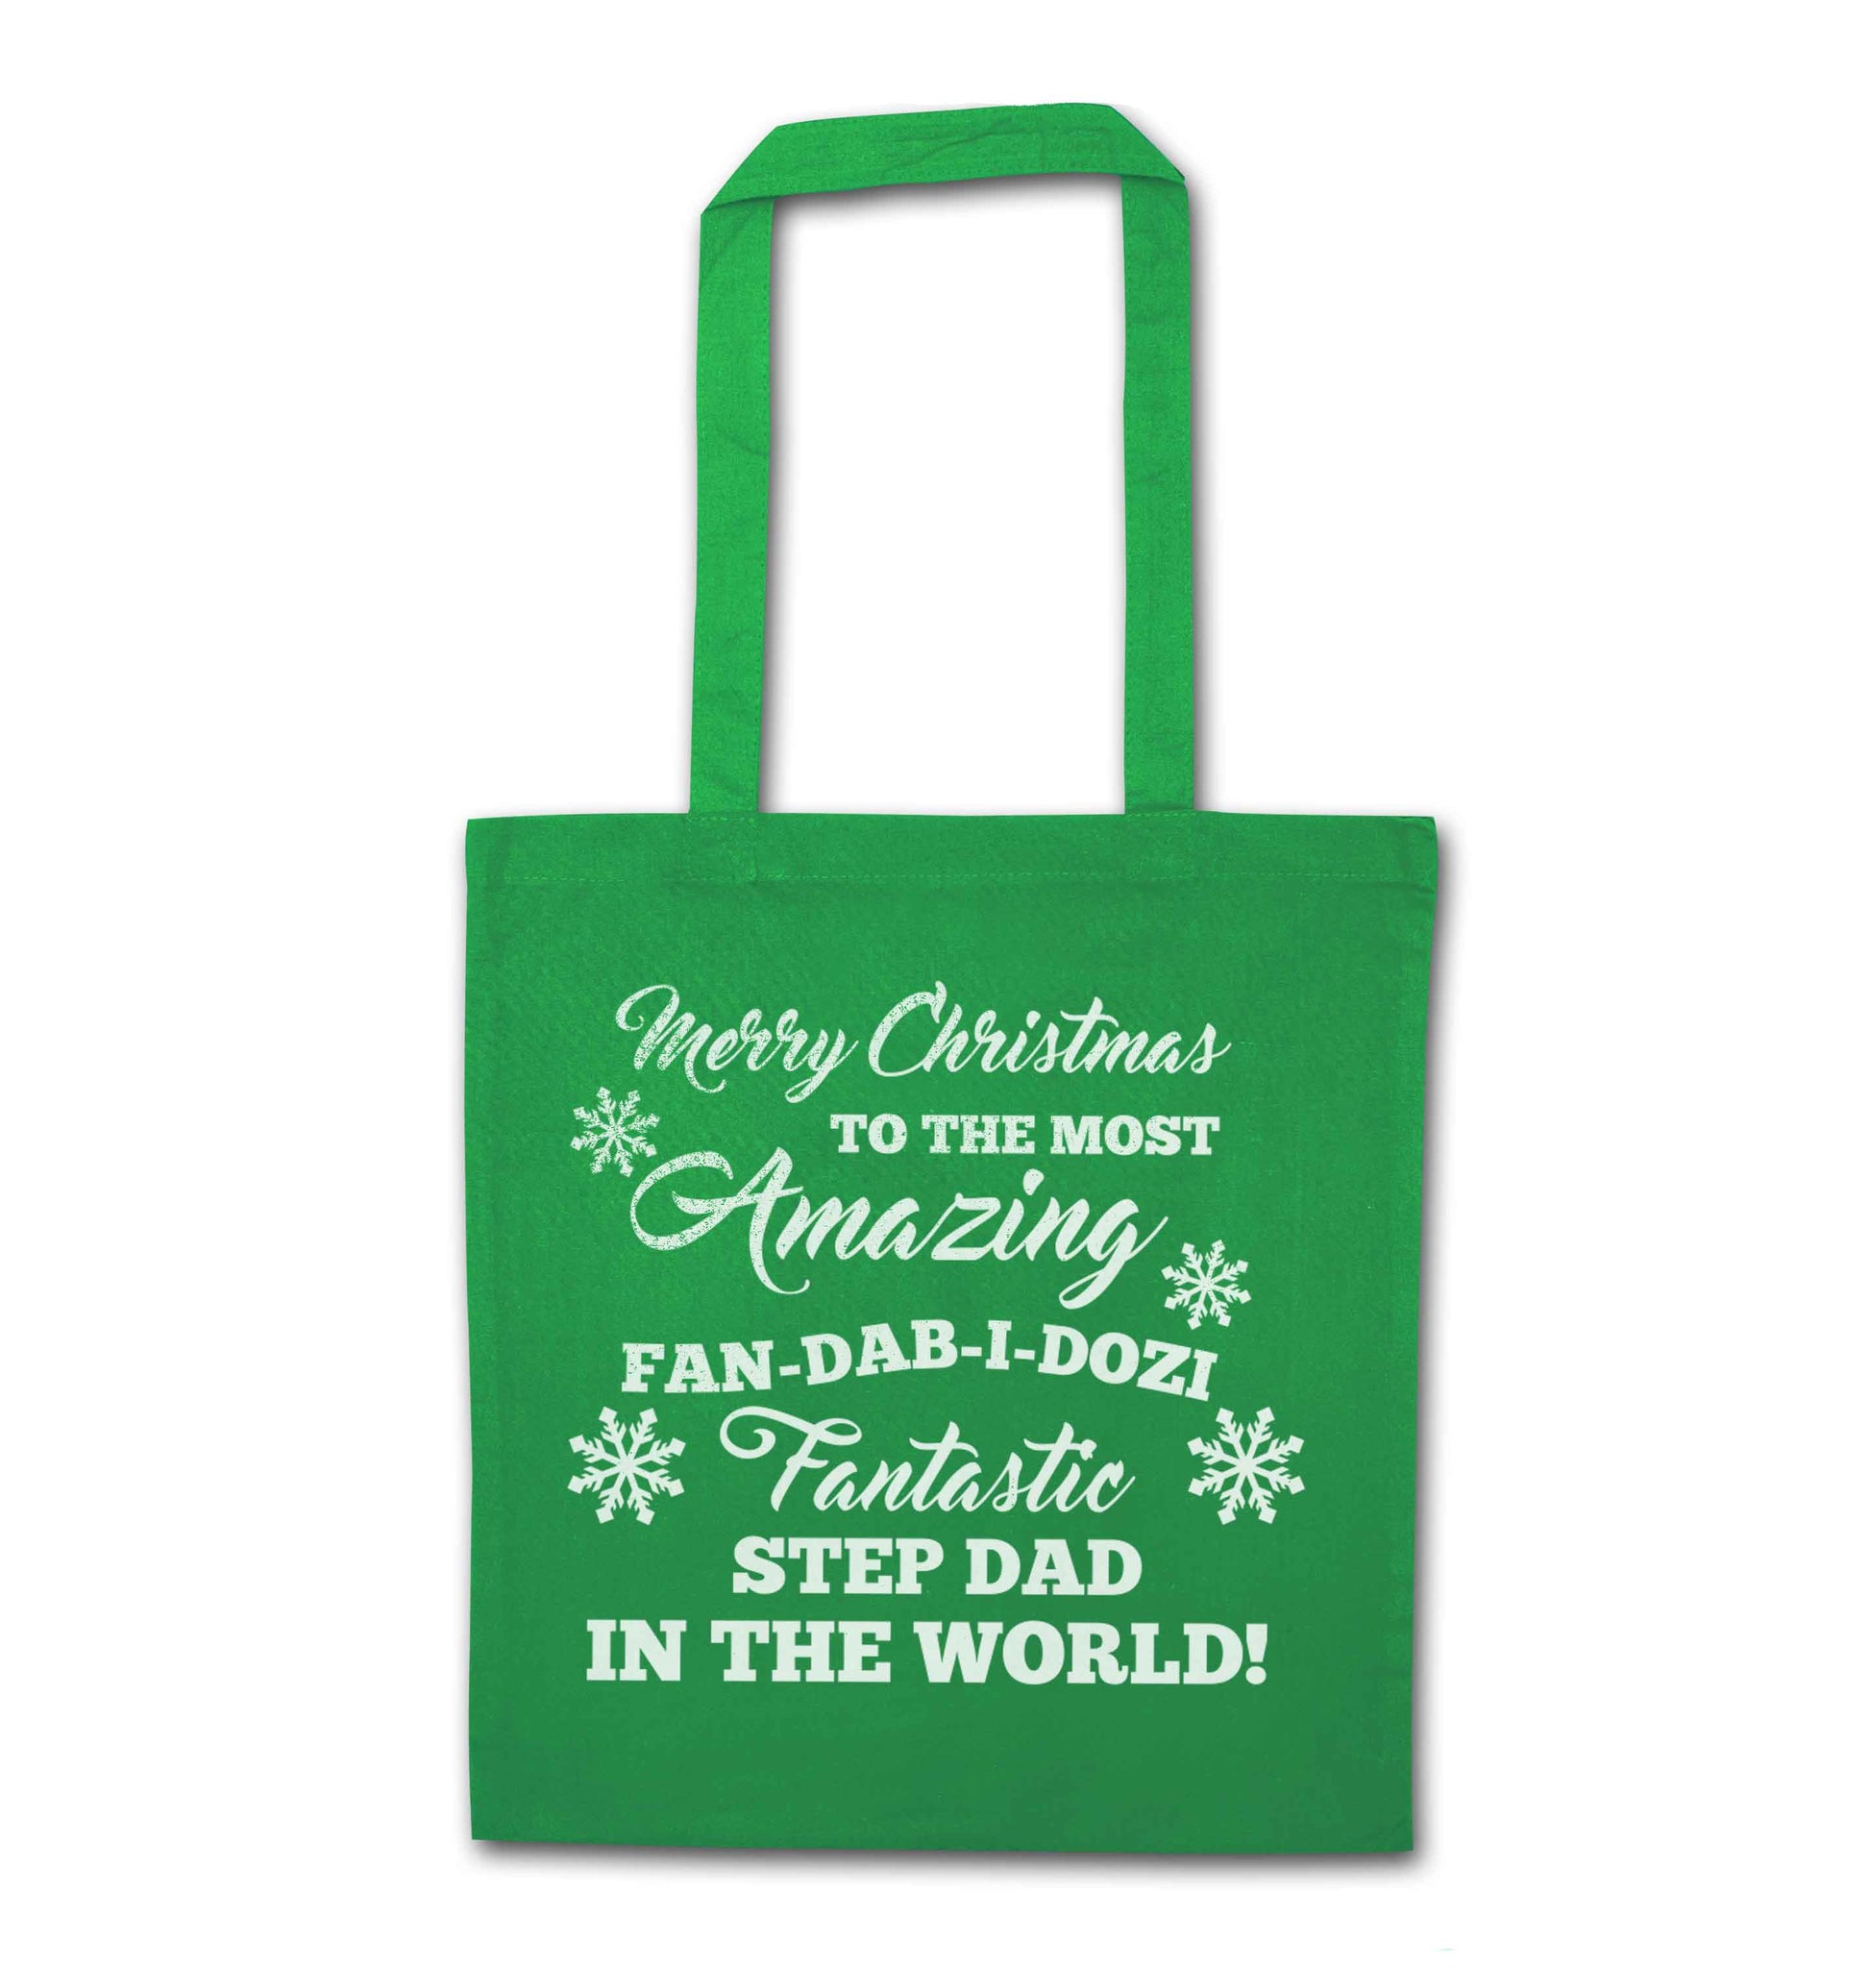 Merry Christmas to the most amazing fan-dab-i-dozi fantasic Step Dad in the world green tote bag